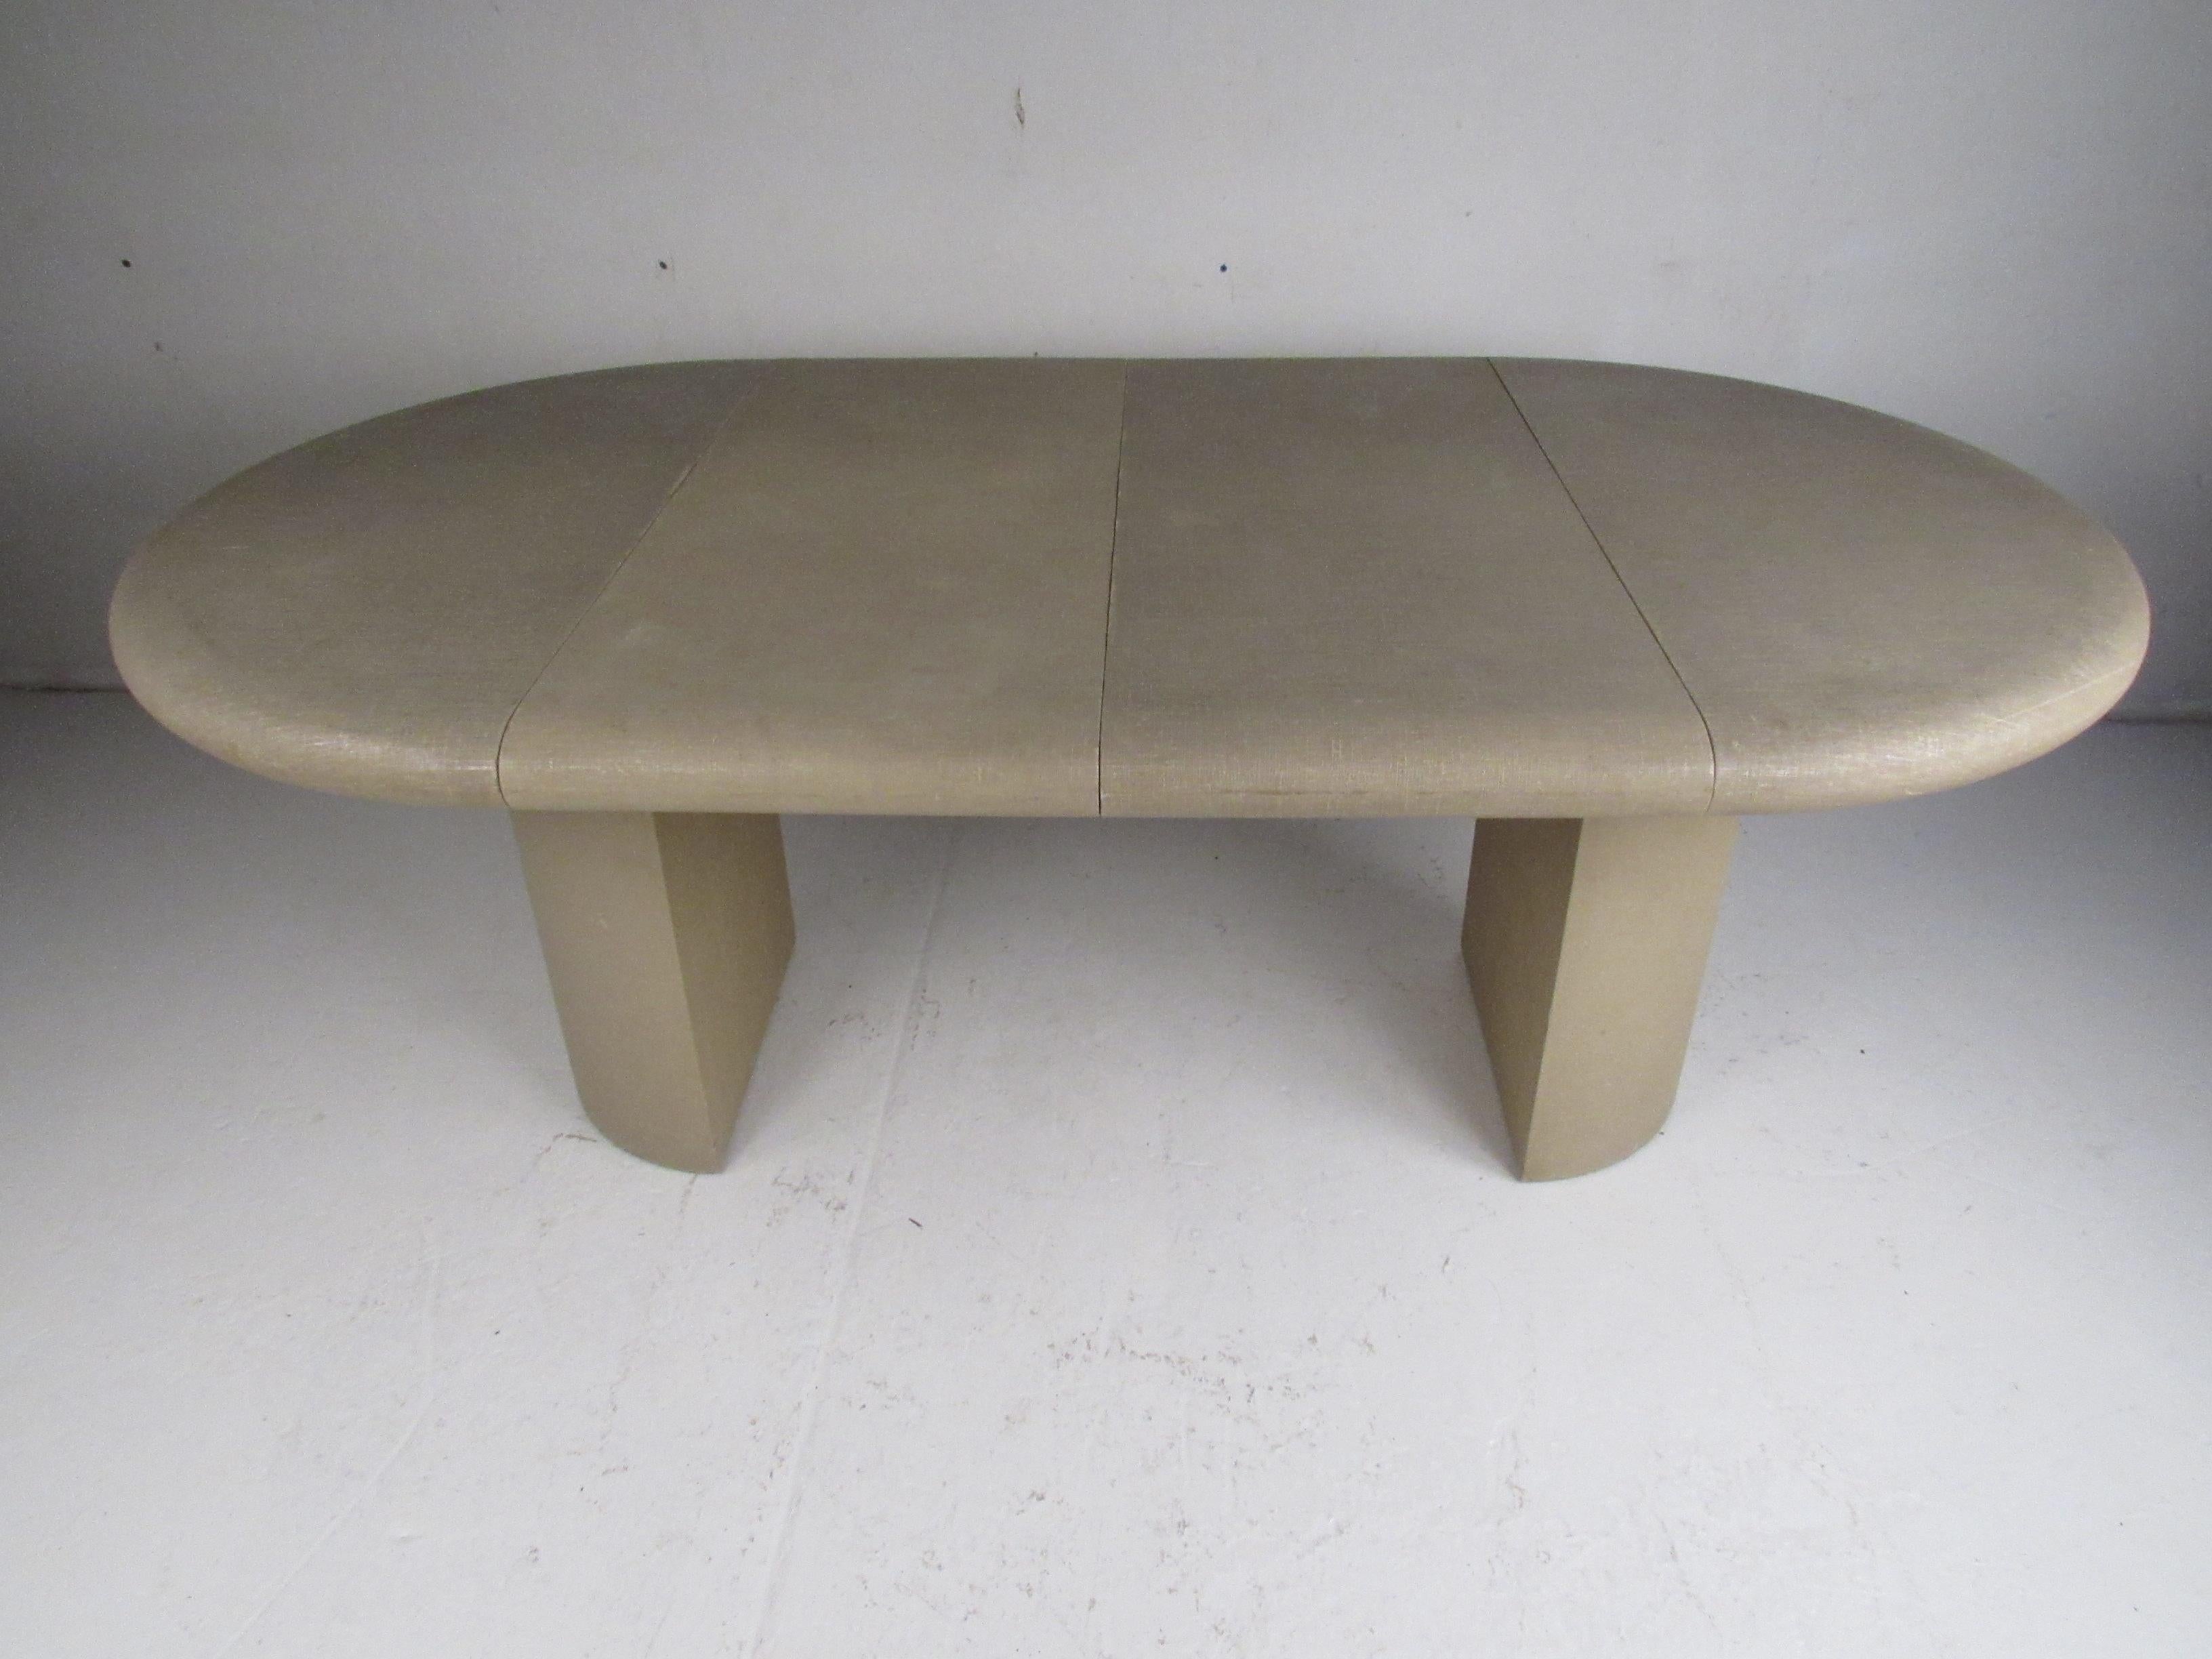 This beautiful vintage modern dining table is covered entirely in grass cloth and boasts a pedestal base. A convenient design that includes two leaves allowing it to expand from 42 inches wide to 78 inches wide. A well made midcentury table with